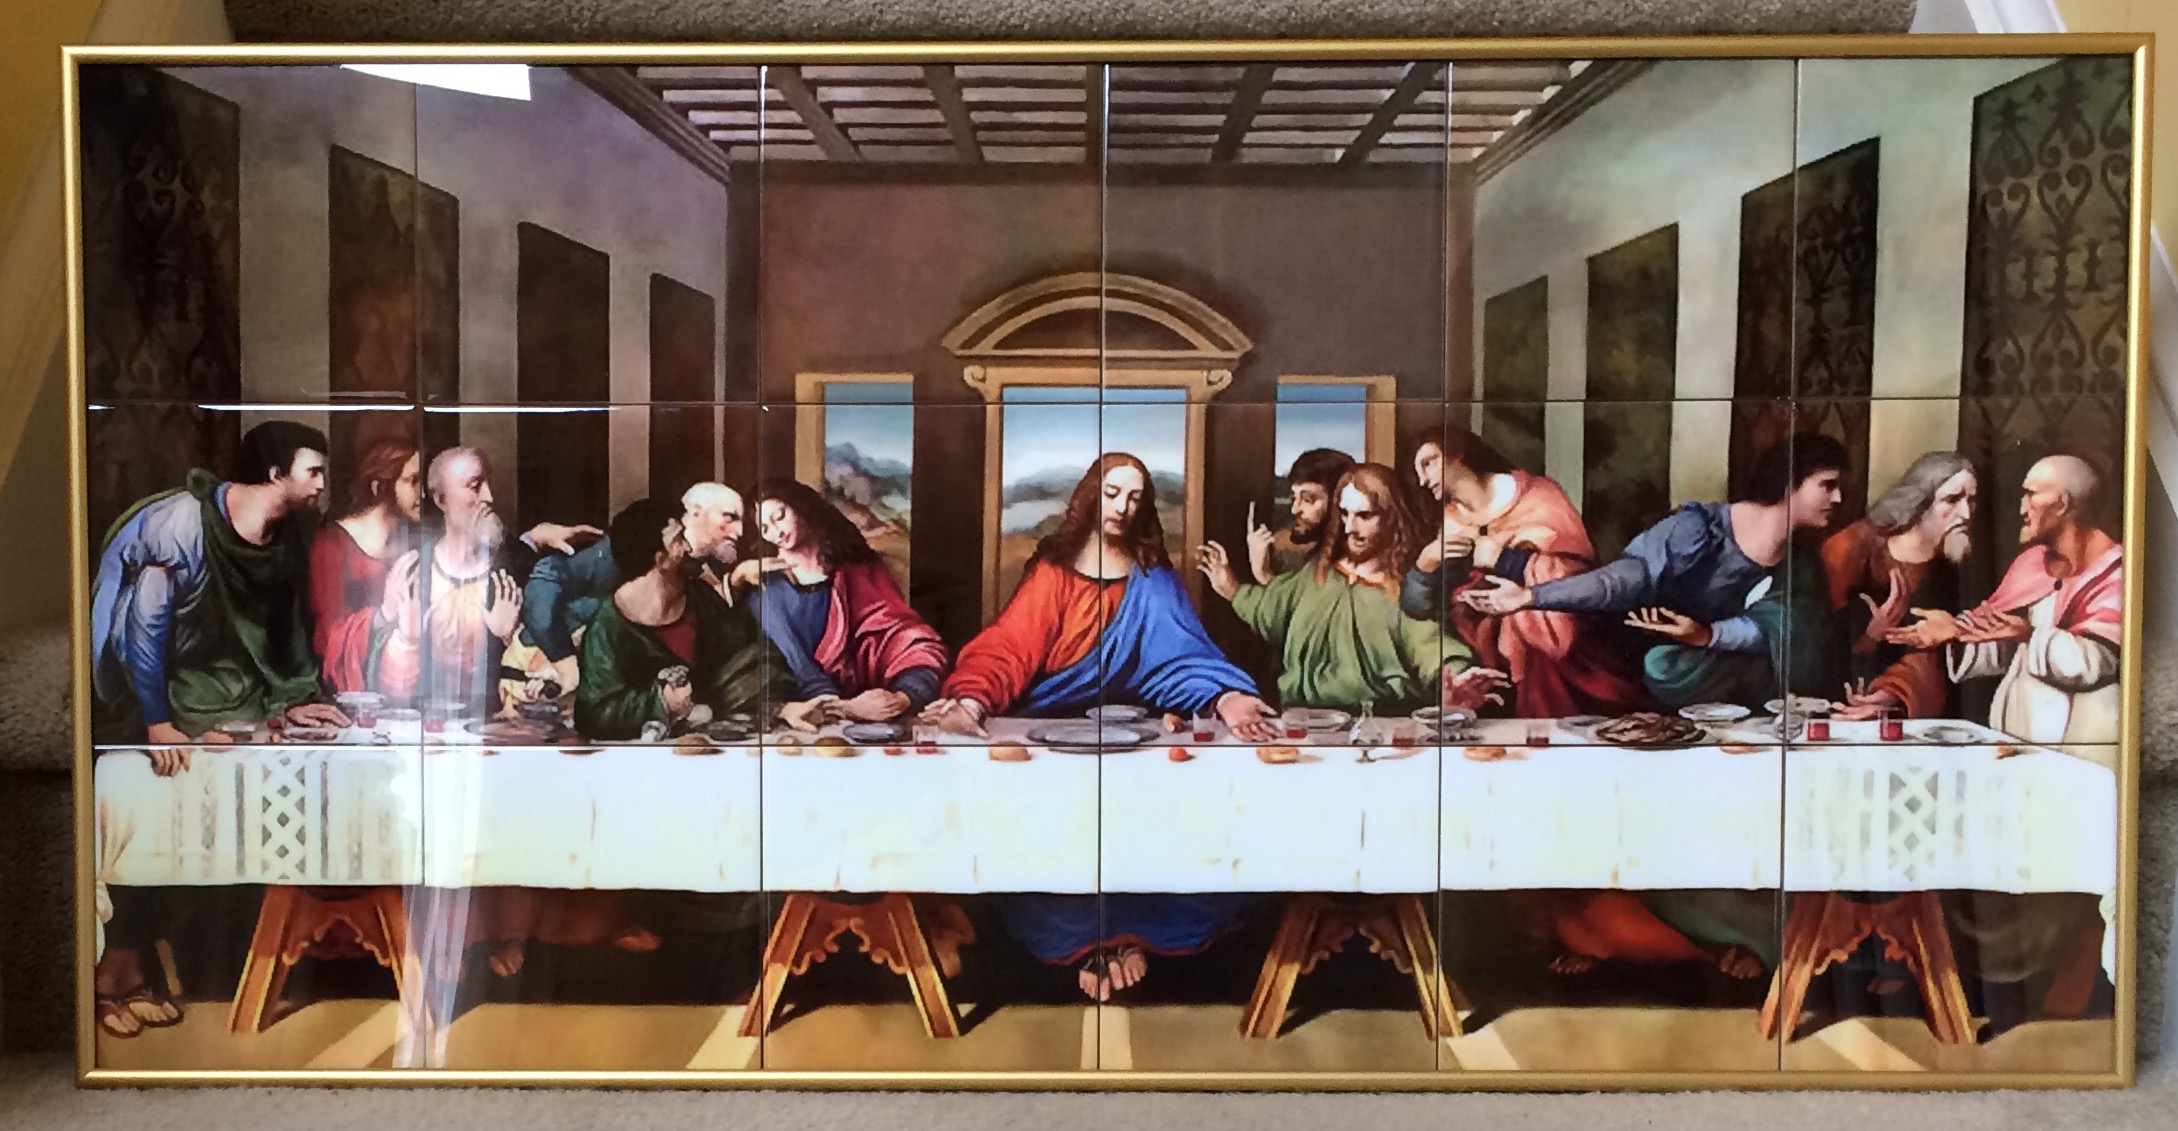 The Last Supper made with sublimation printing